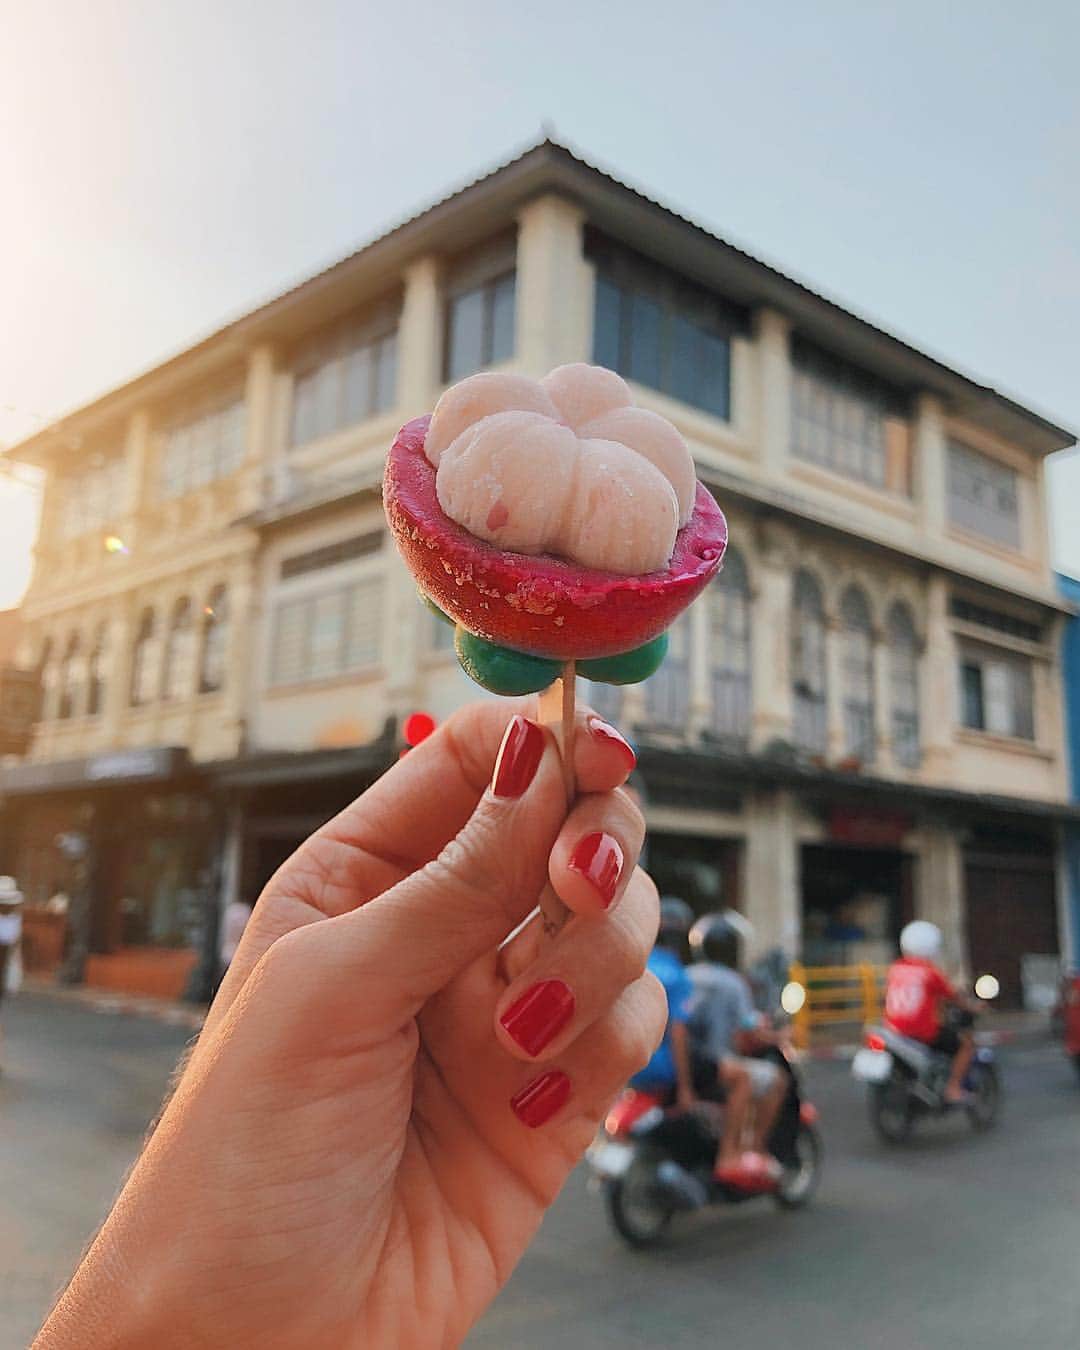 Girleatworldのインスタグラム：「I just got back from Phuket! I saw this cool-looking Mangosteen Gelato in the #girleatworld hashtag by @eiffelyoo and I just *had* to go find it myself! Mangosteen, the national fruit of Thailand, is often referred to as "Queen of Fruits" and prized for its sweet and sour juicy flesh. And if you ever eat the real Mangosteen fruit, be careful of the purple juice that comes out from the thick skin! It contains tannin and can permanently stain clothes.  When we think of Phuket, the immediate picture that came to mind is the island with blue water and white sand beach. But I found a different side of Phuket in the old town. I didn’t expect to learn so much history, thai-chinese culture and the colorful shophouses.  I've written about my Old Town Phuket experience in my blog, which you can find the link to in my profile above 👆🏼🆙🔼 More from Phuket to come soon!  PS: you can find this Gelato at China Inn - along with other super cool realistically shaped fruit gelatos by @thongdeegelato  #shotoniphone #girleatworld #mangosteen #visitthailand #thailand #lostinthailand #amazingthailand #queenoffruits #phuket #oldtownphuket」